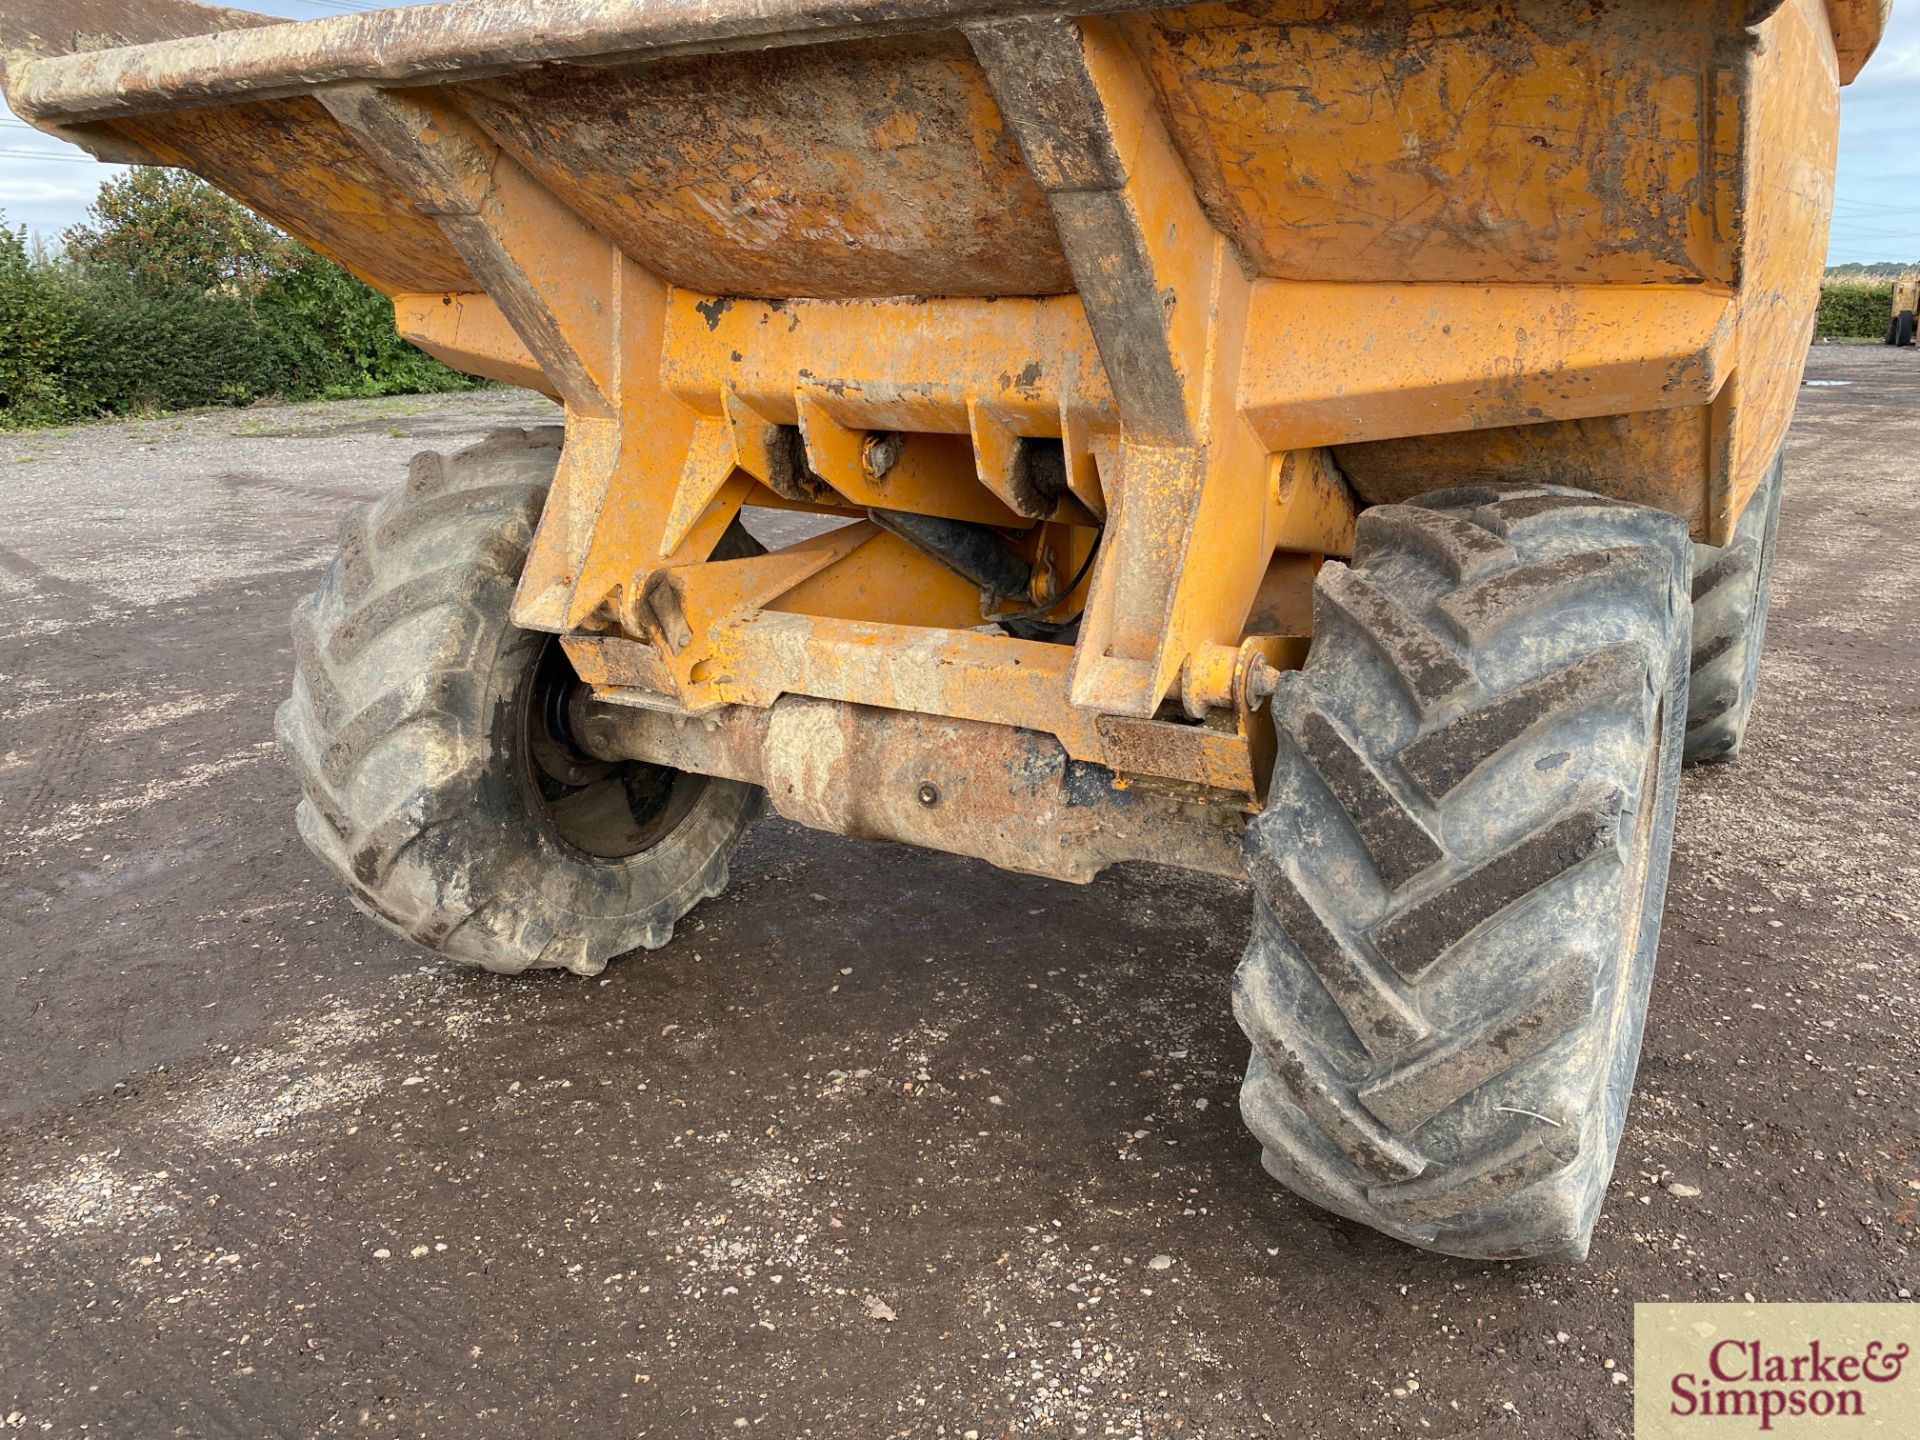 Benford 6T 4WD pivot steer dumper. 2000. Serial number SLBDNOOEY7H0721. 405/70R20 wheels and - Image 9 of 36